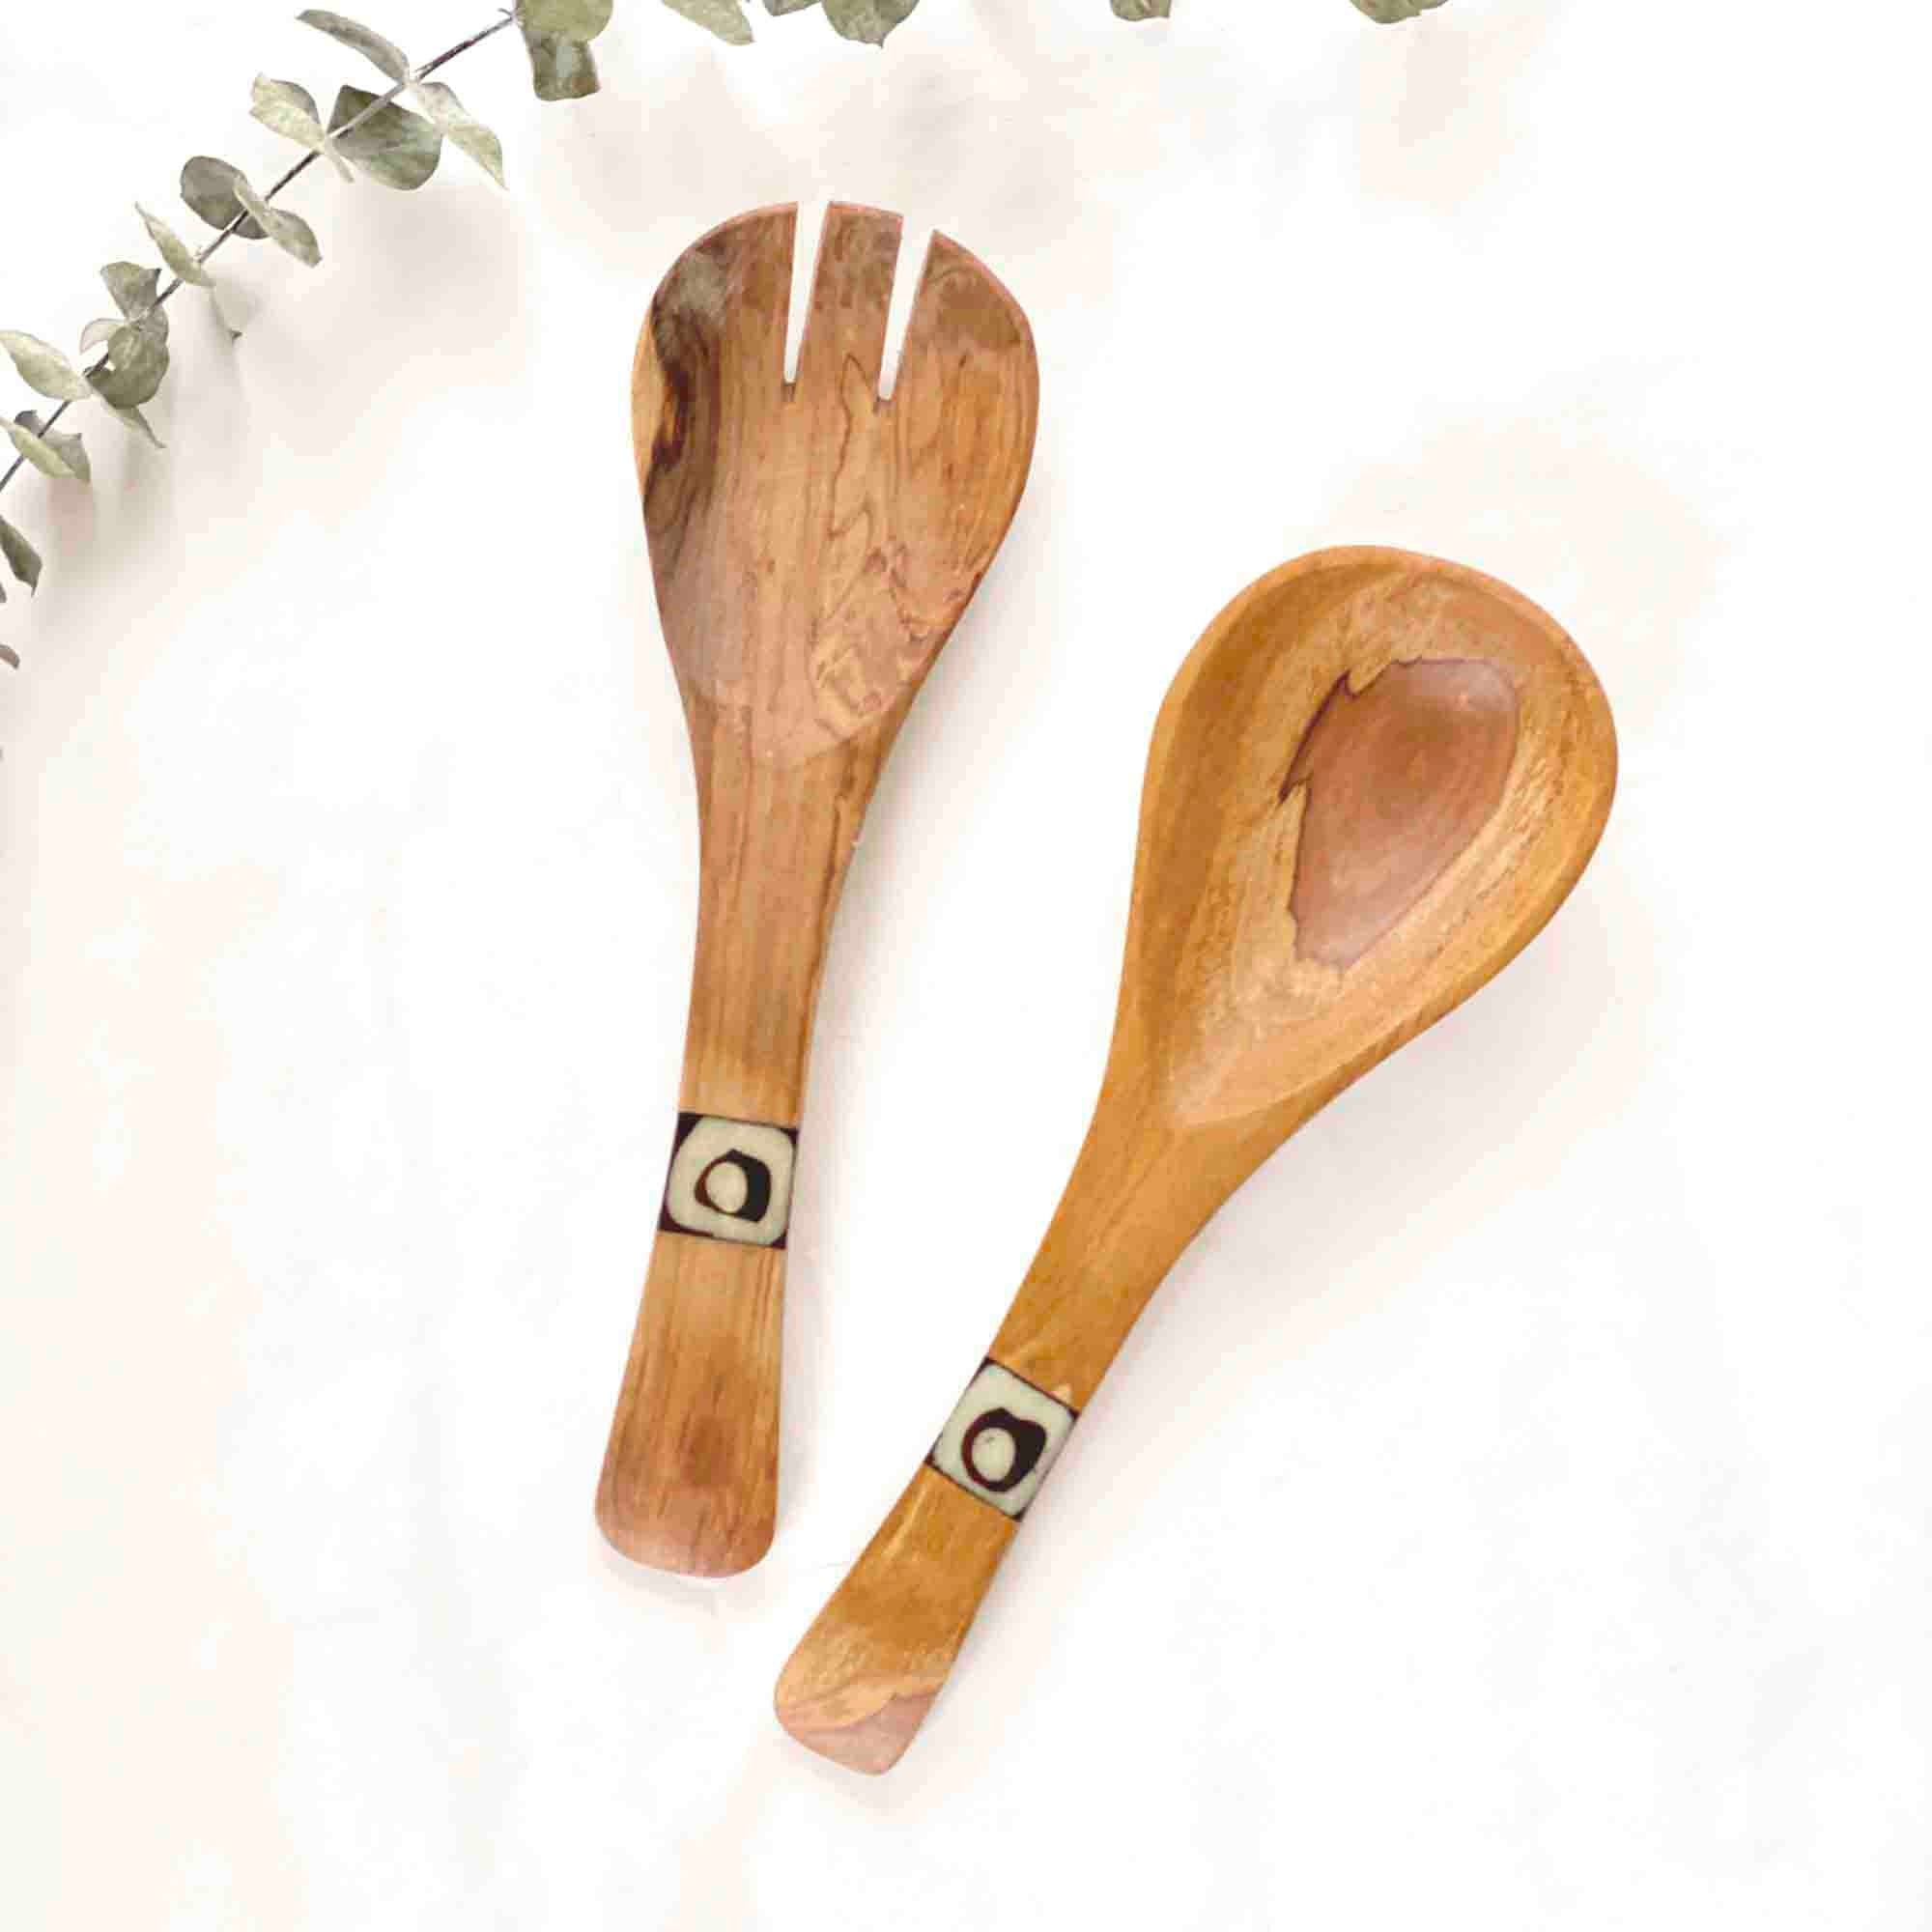 Small Olive Serving Set with inlaid Bone Handles 8 inch